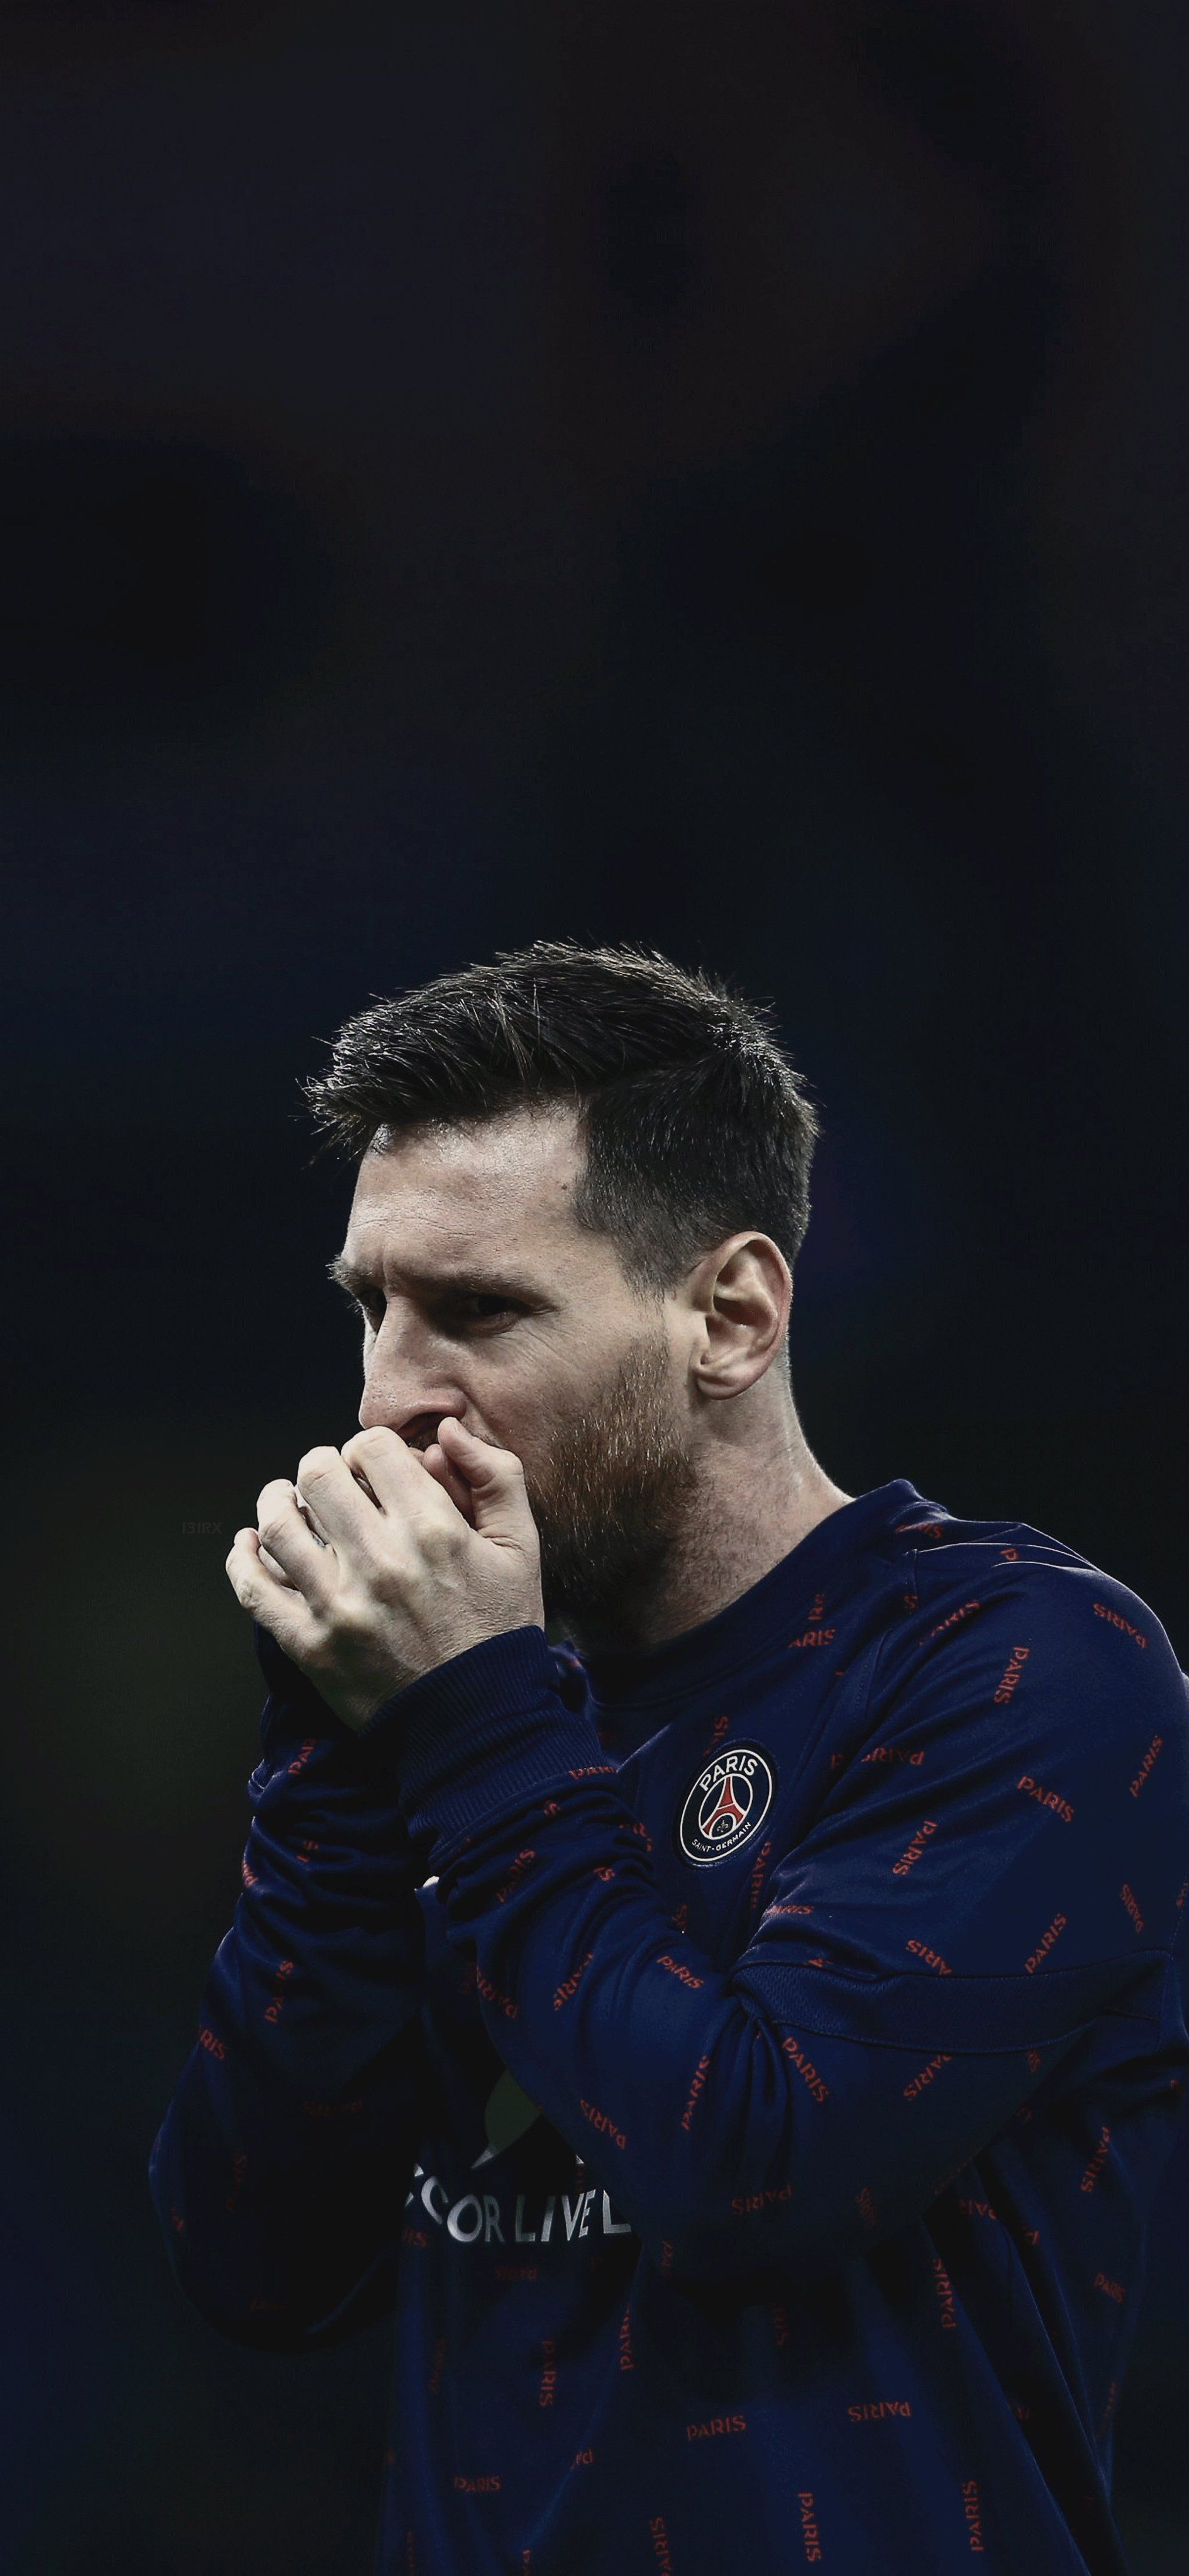 Lionel Messi wallpaper 2021 1080x2340 wallpaper for mobiles and tablets - Messi